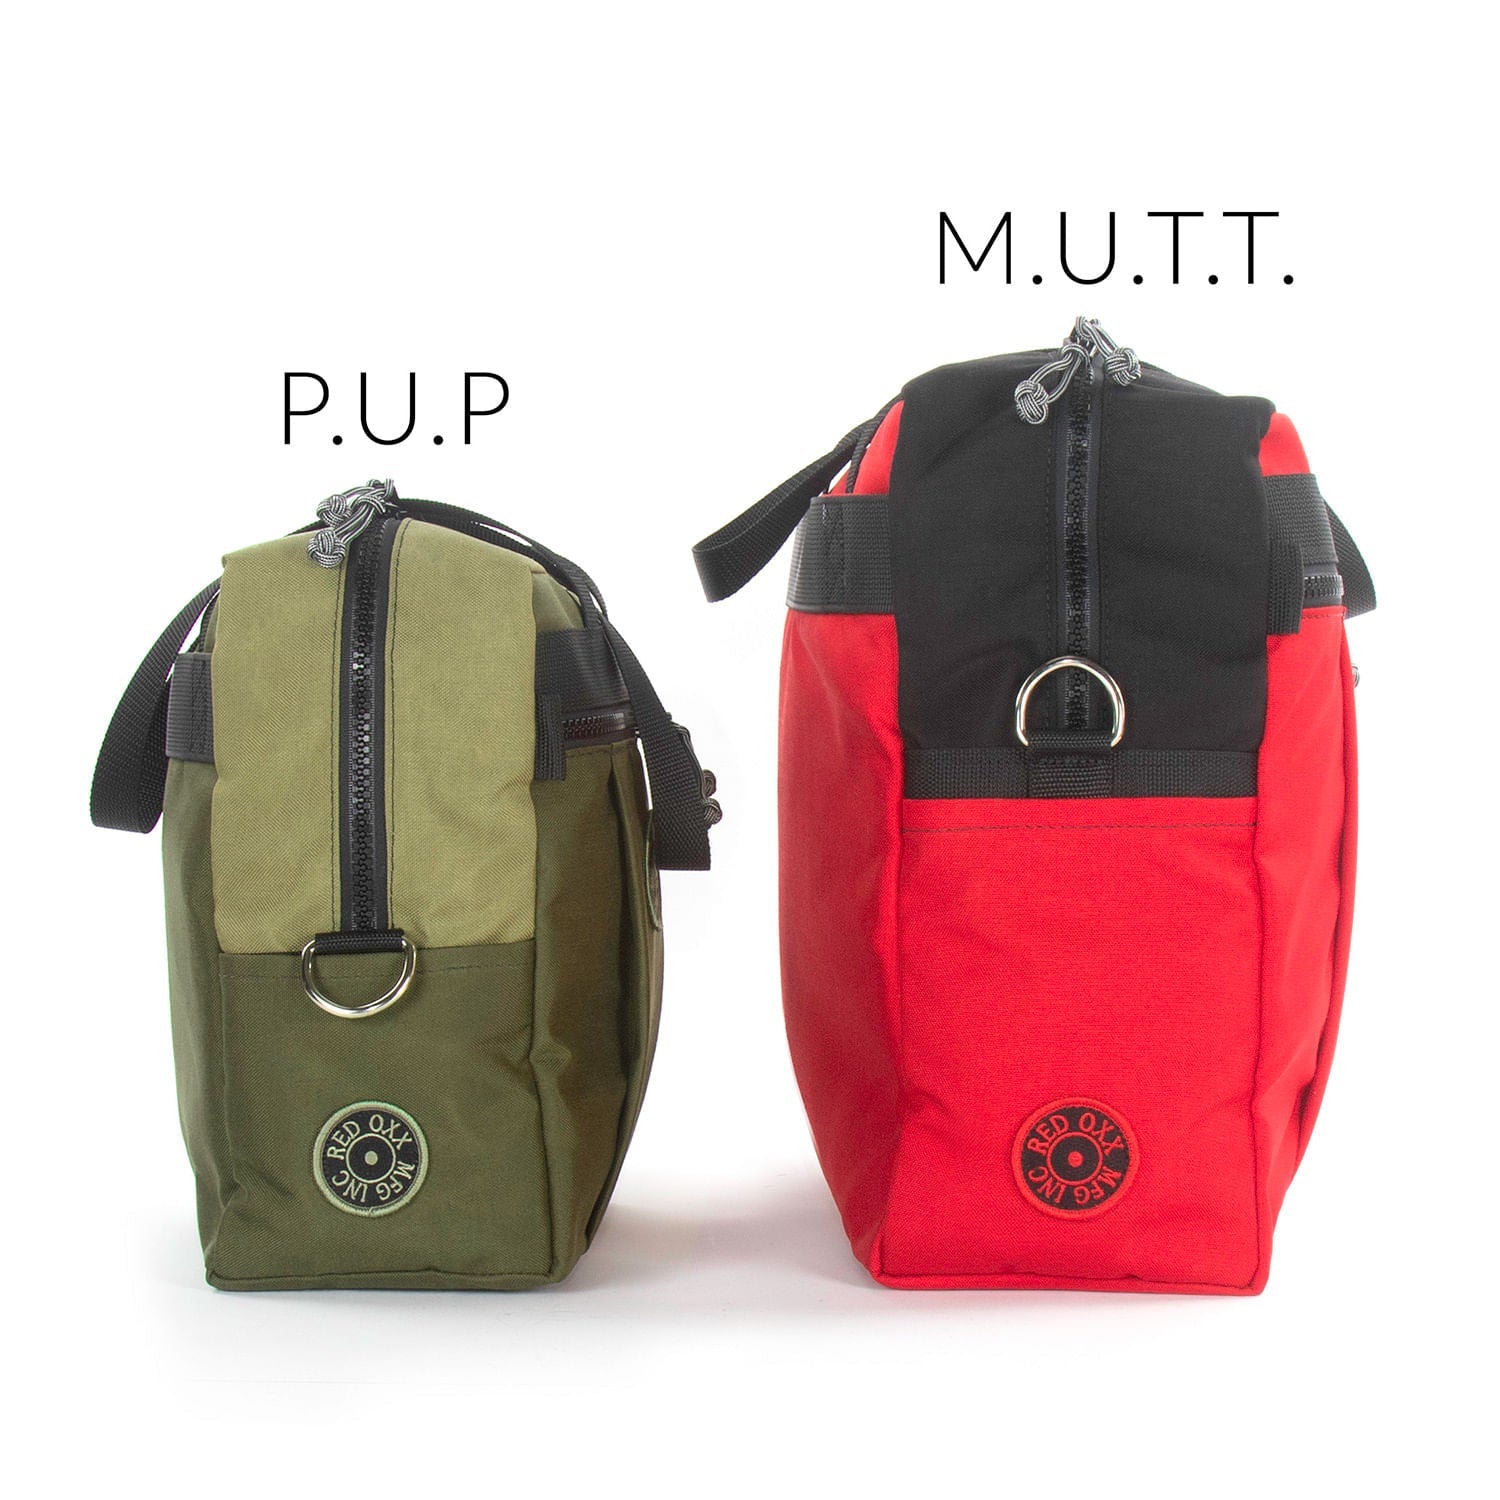 Comparison of PUP and MUTT - From left to right.  End view